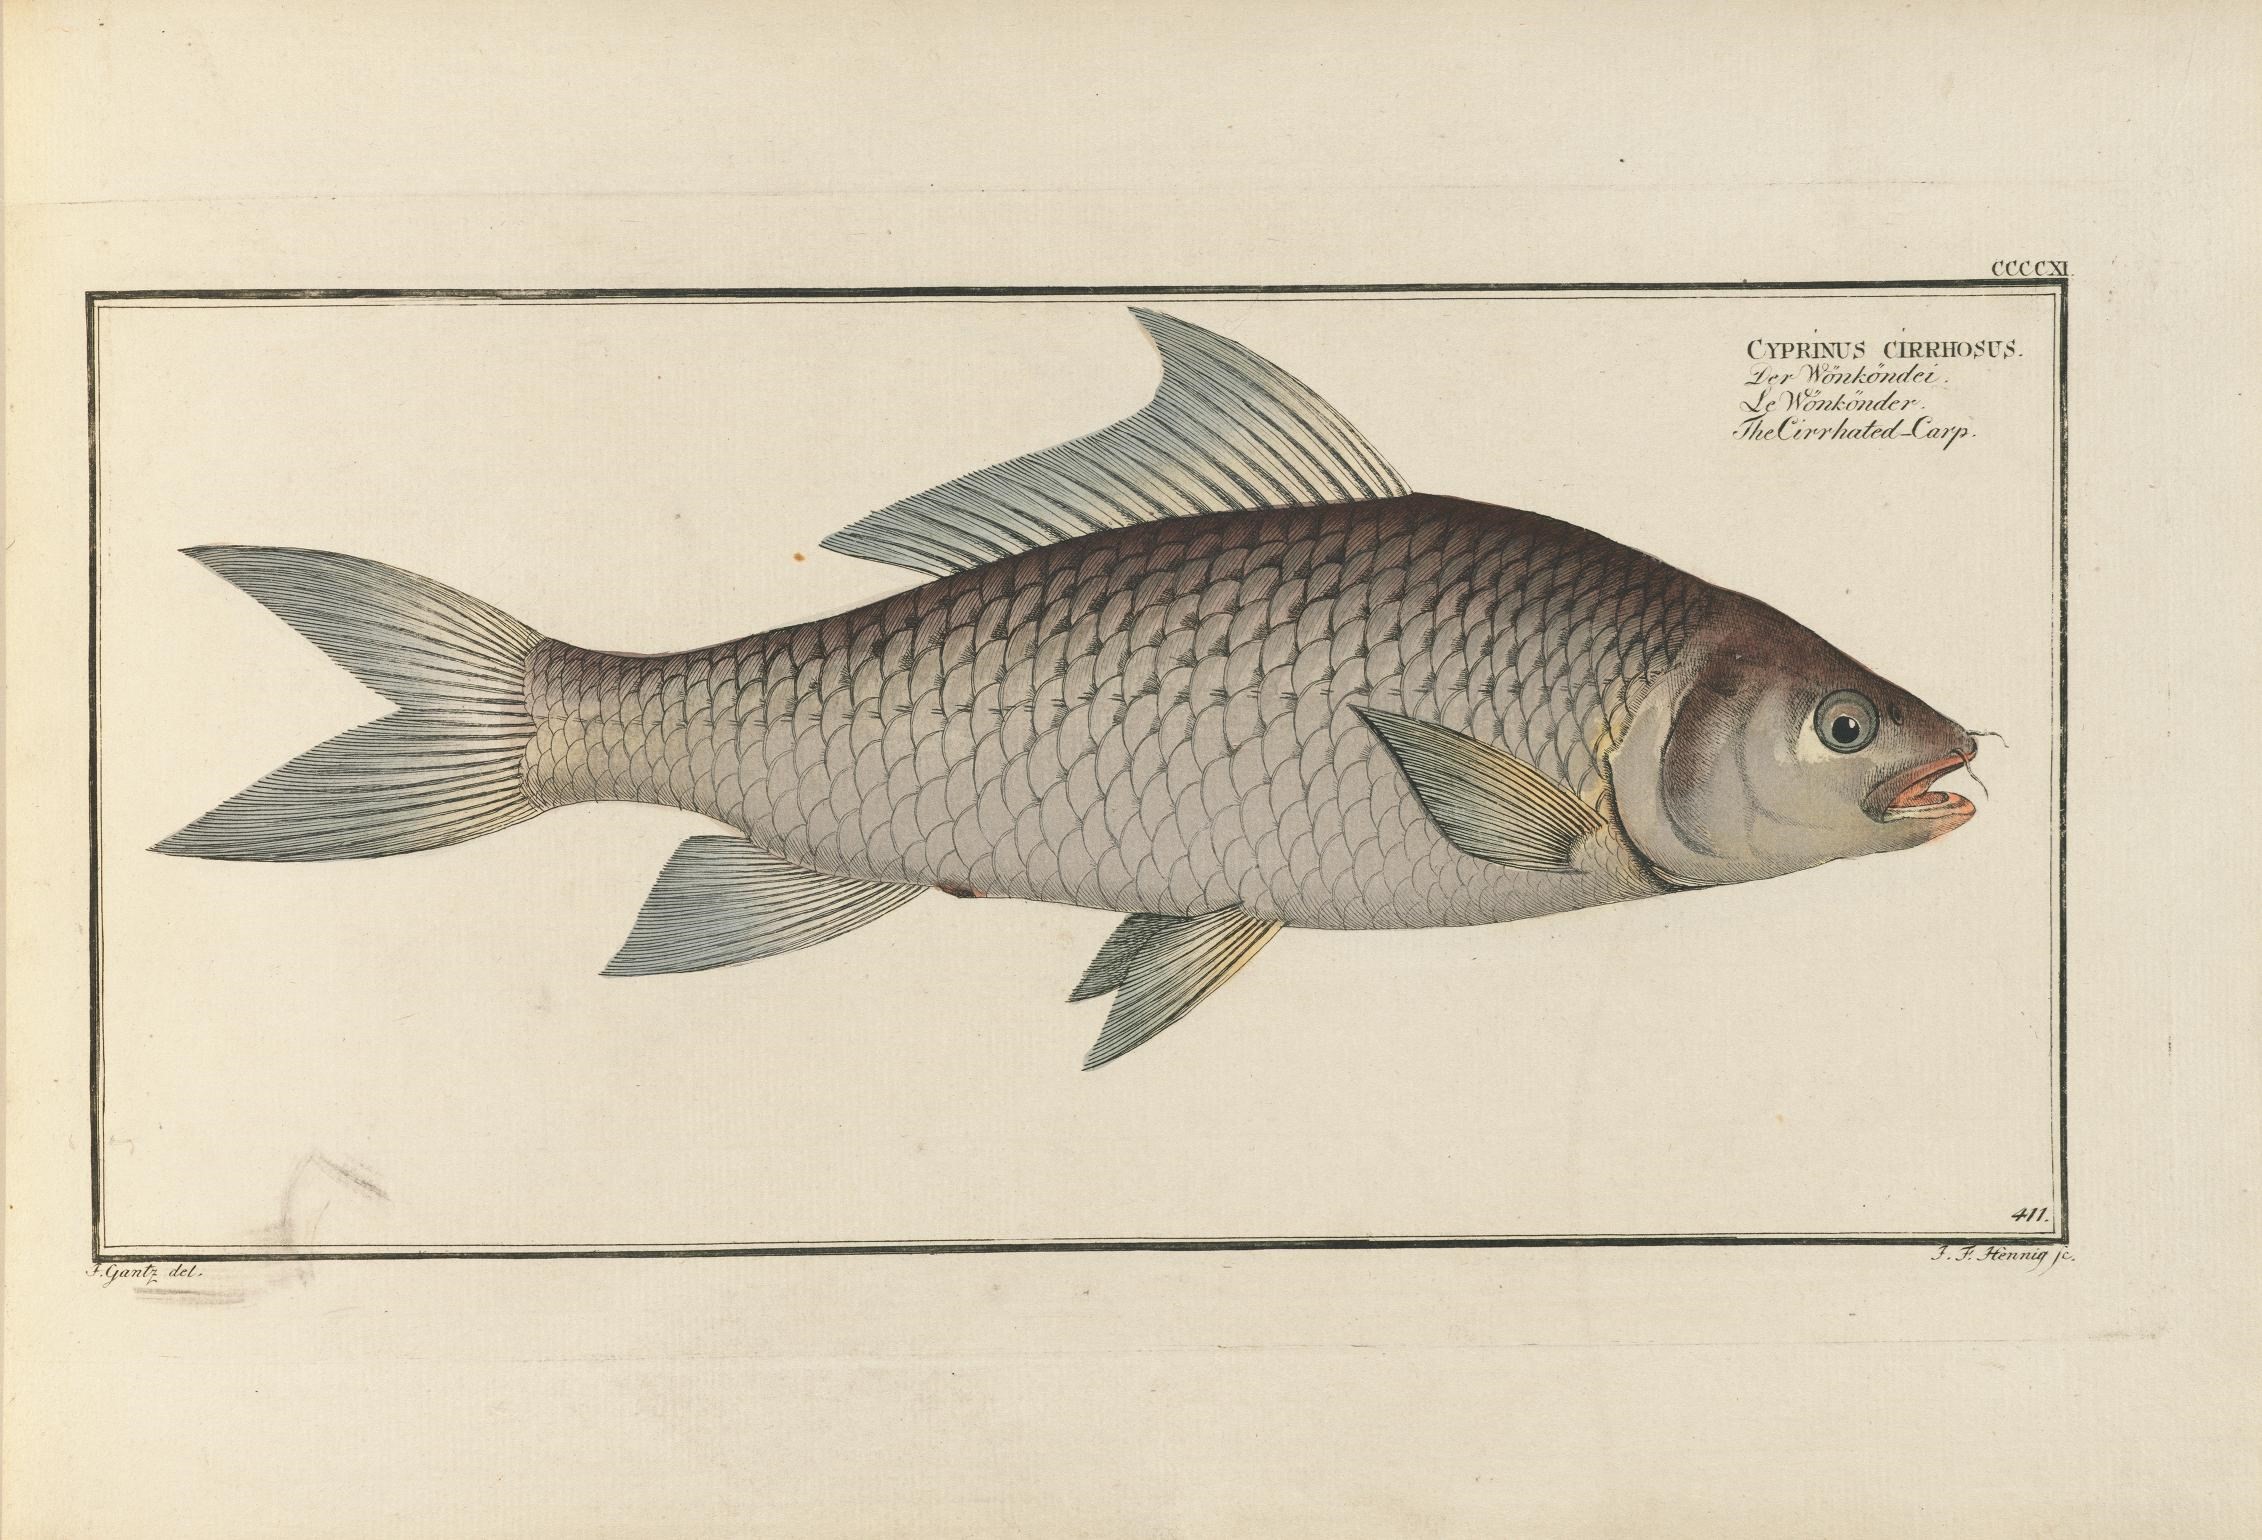 this is a fish in an engraving style